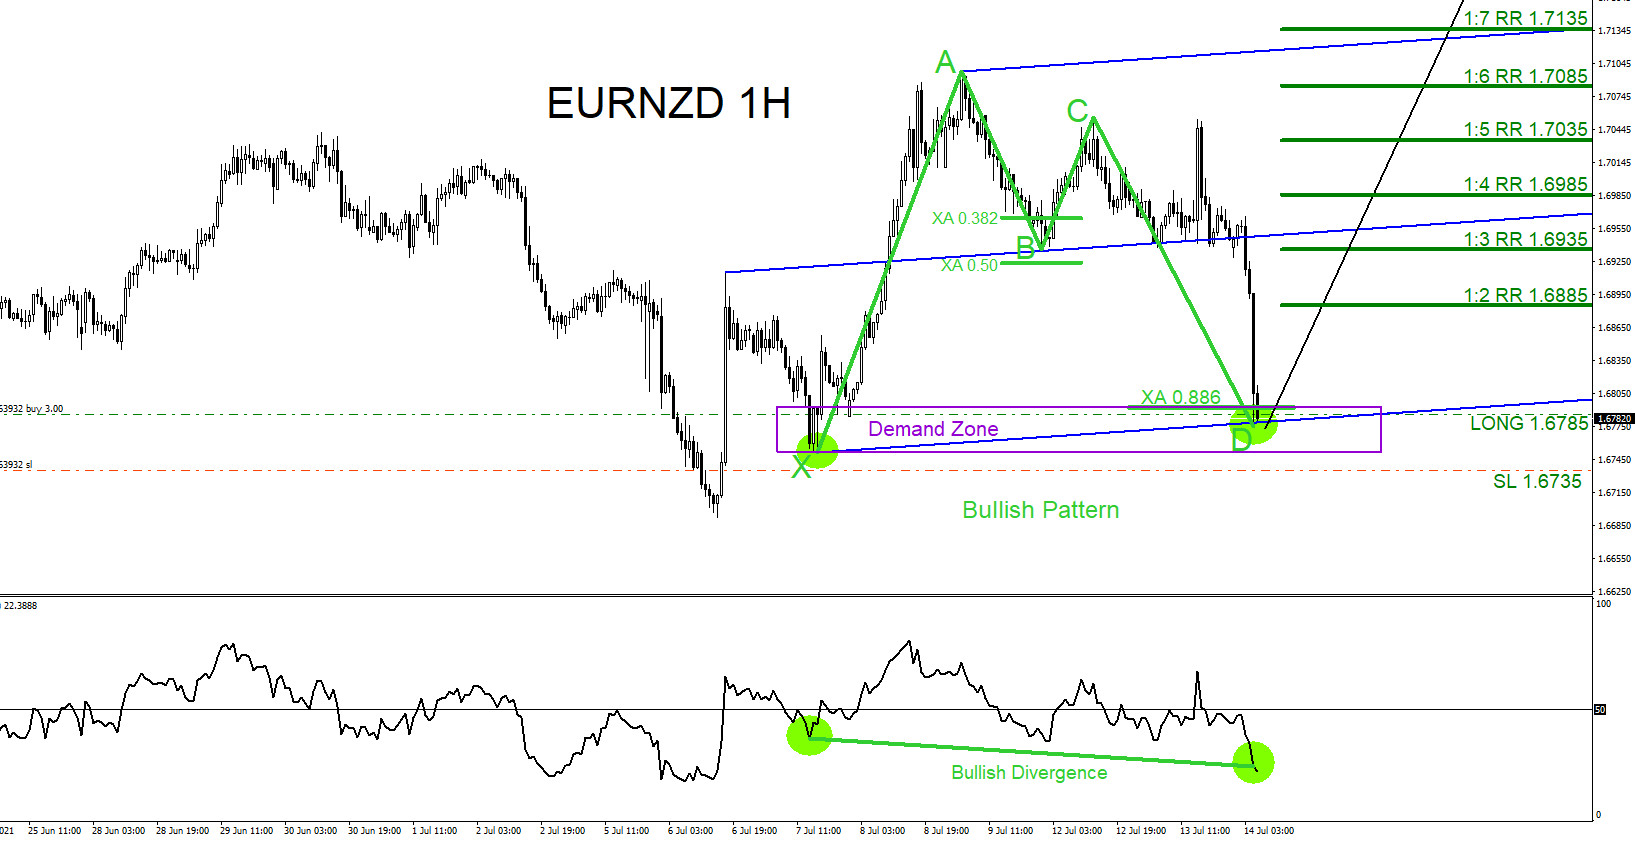 EURNZD : Bullish Patterns Calling for Move Higher